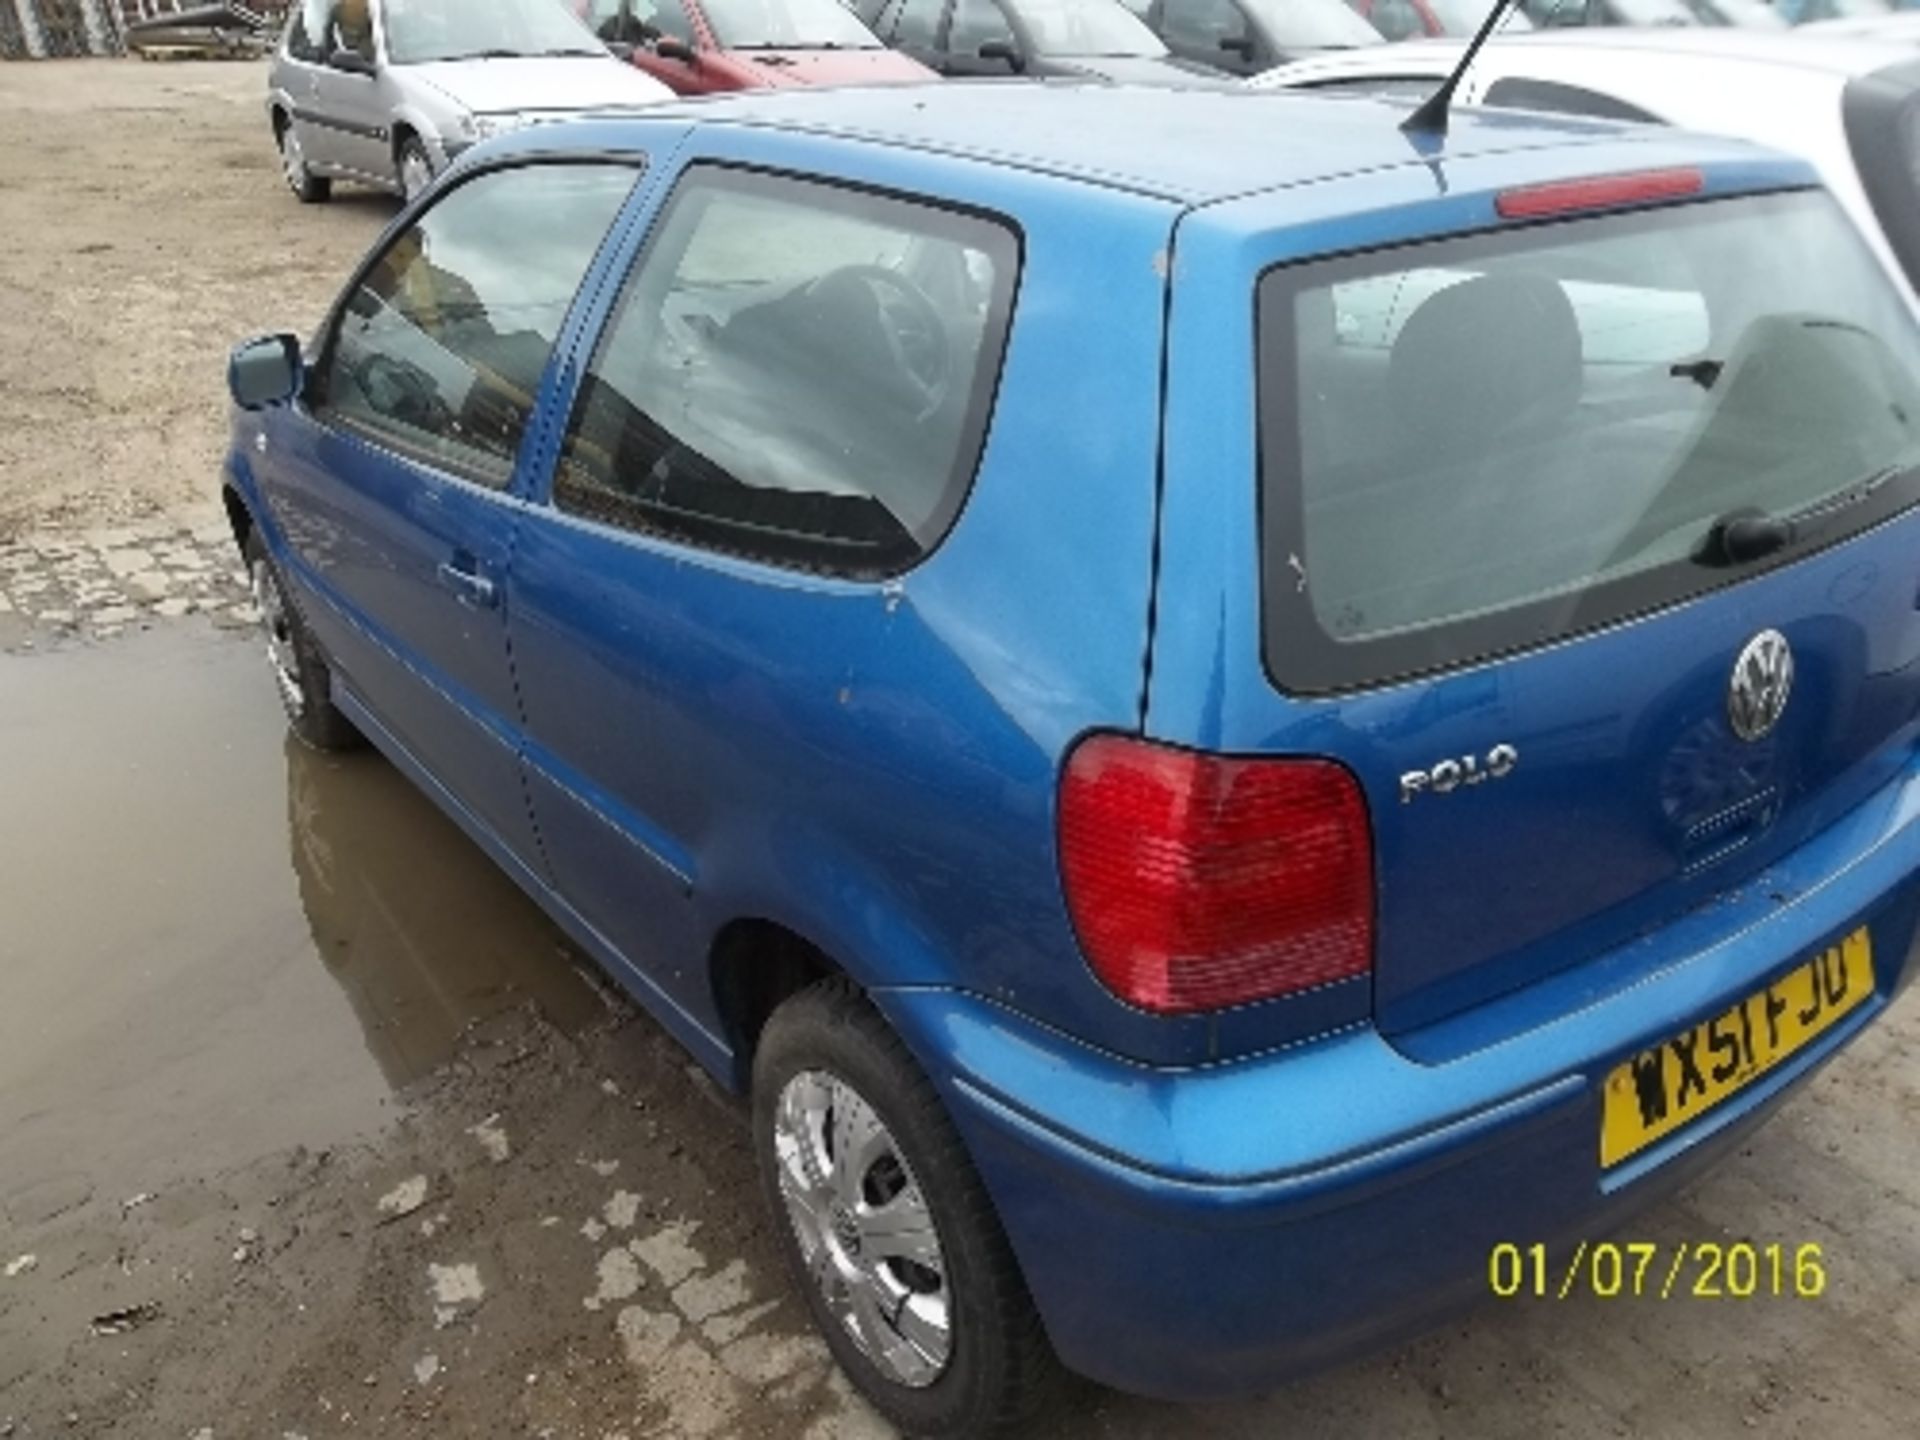 Volkswagen Polo Match - WX51 FJO Date of registration: 30.11.2001 1390cc, petrol, manual, blue - Image 4 of 4